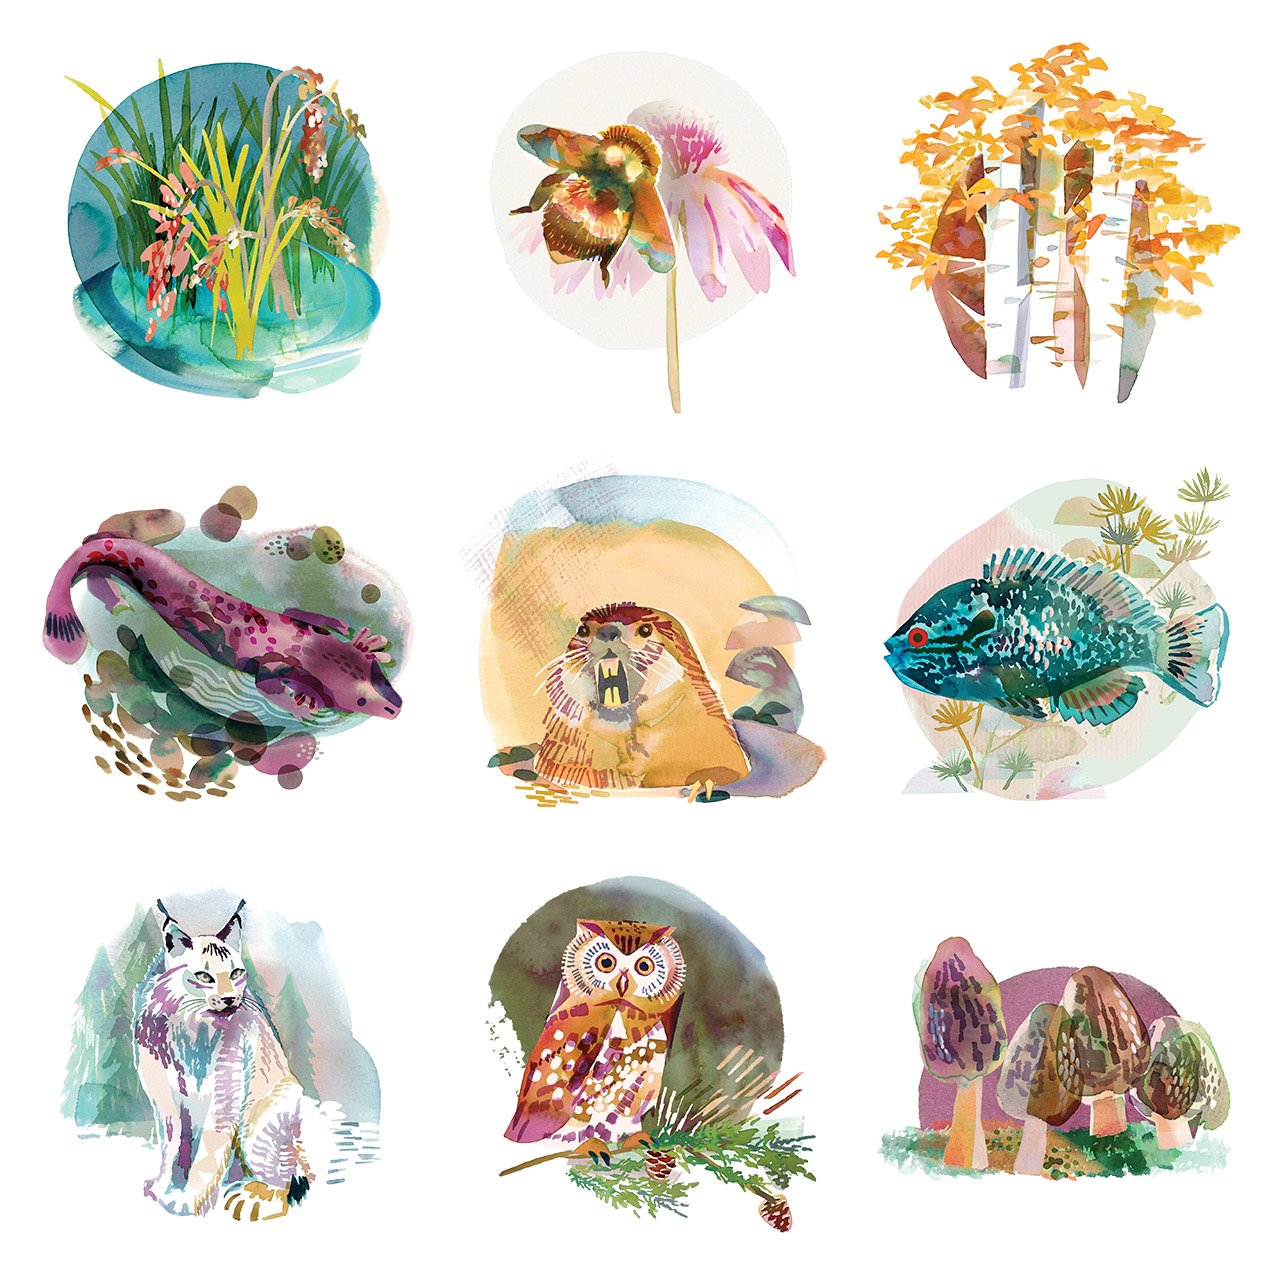 Illustrations of Wild Rice, Rusty Patched Bumblebee, Quaking Aspen, Mudpuppy, Northern Pocket Gopher, Northern Sunfish, Canada Lynx, Boreal Owl, and Morel Mushroom.